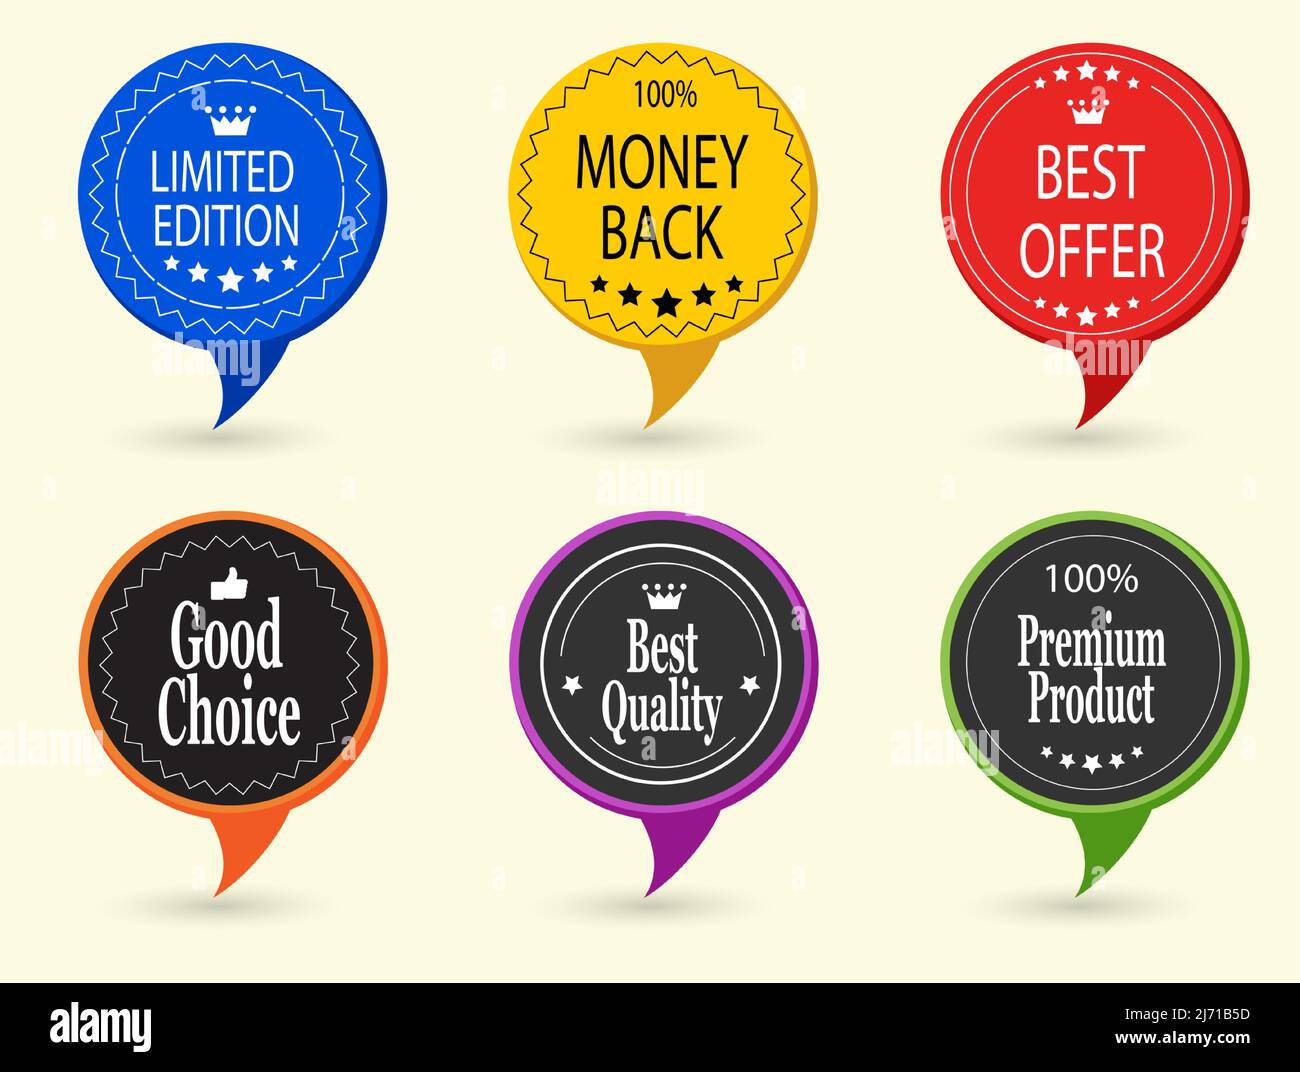 Colorful Speech Bubble With Different Sales And Promotion Offers Stock Vector